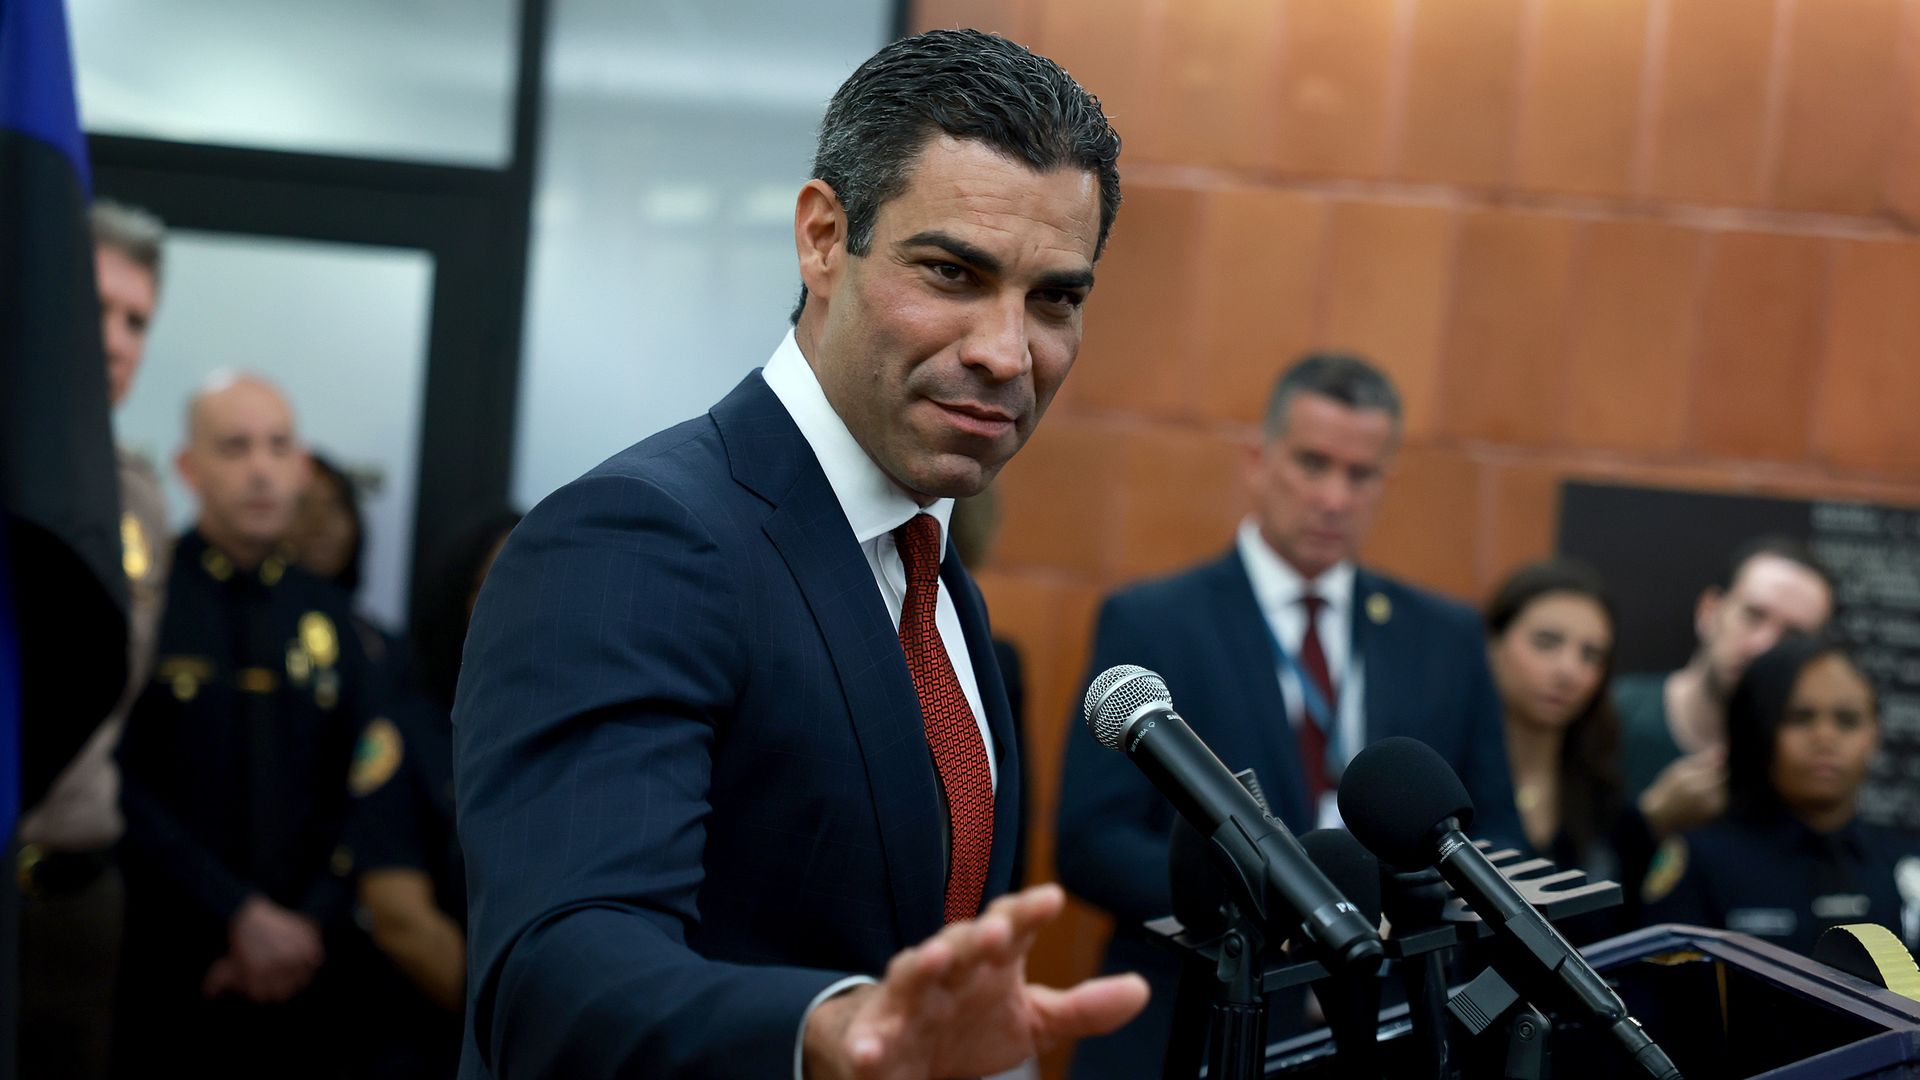 MIAMI, FLORIDA - JUNE 12: City of Miami Mayor Francis Suarez speaks to the media at the Miami Police Department about former President Donald Trump's appearance at the Wilkie D. Ferguson Jr. 